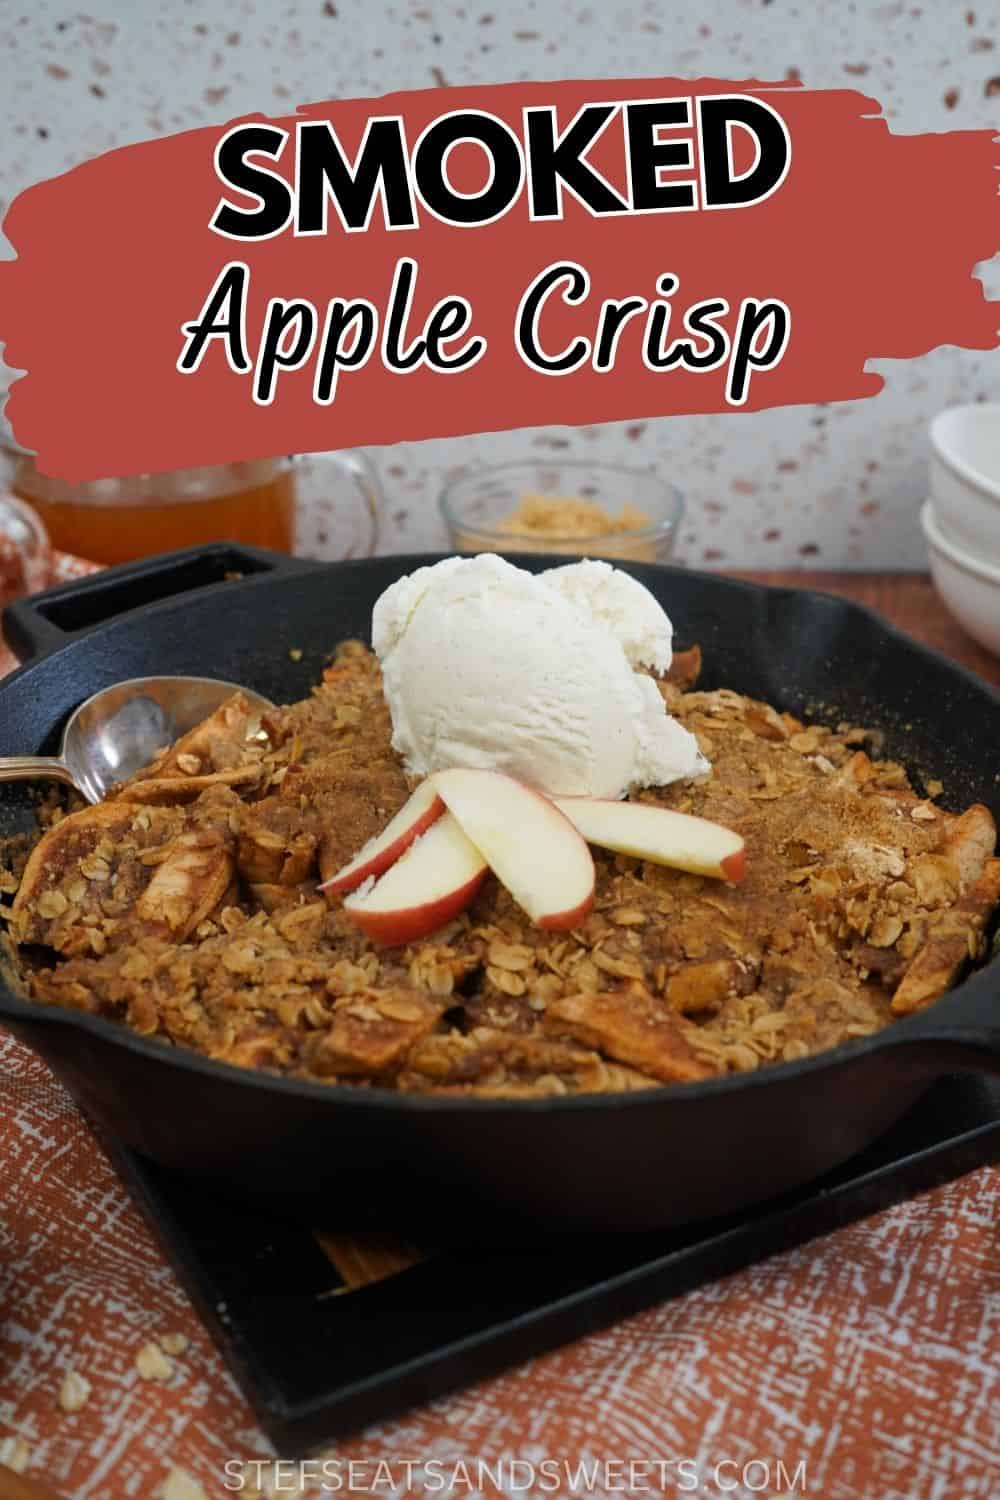 Smoked Apple Crisp with text